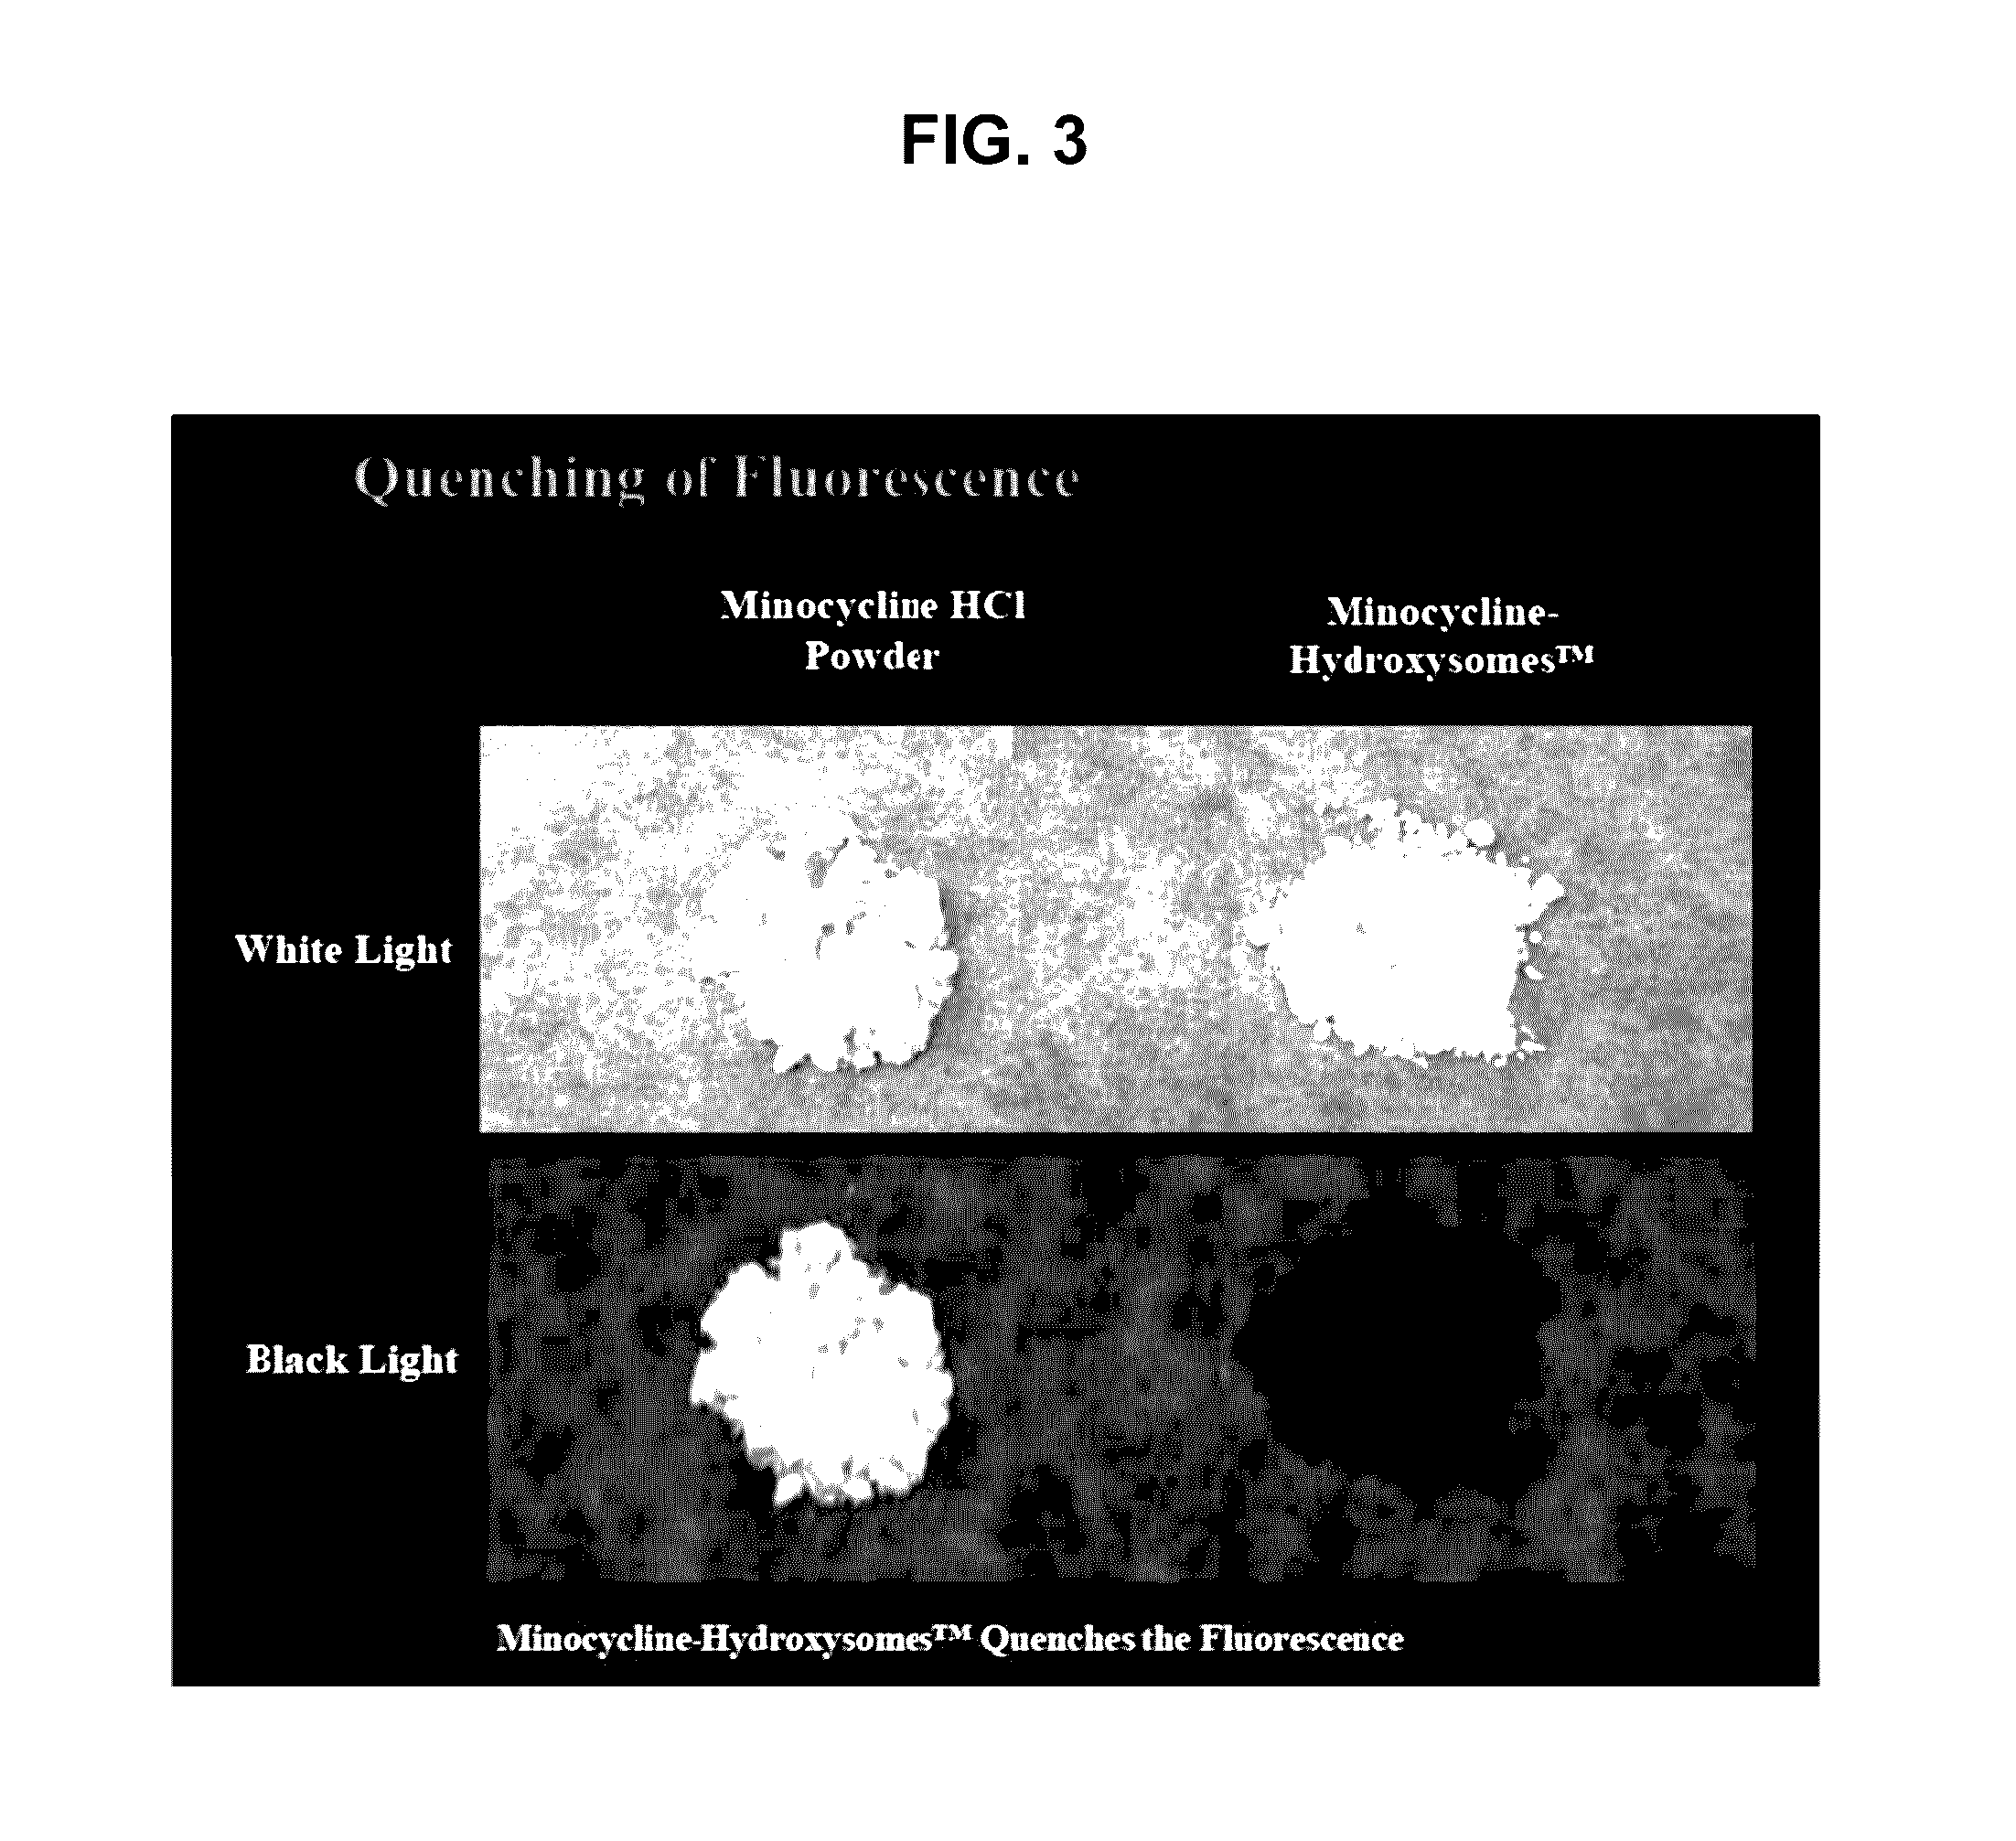 Topical minocycline compositions and methods of using the same